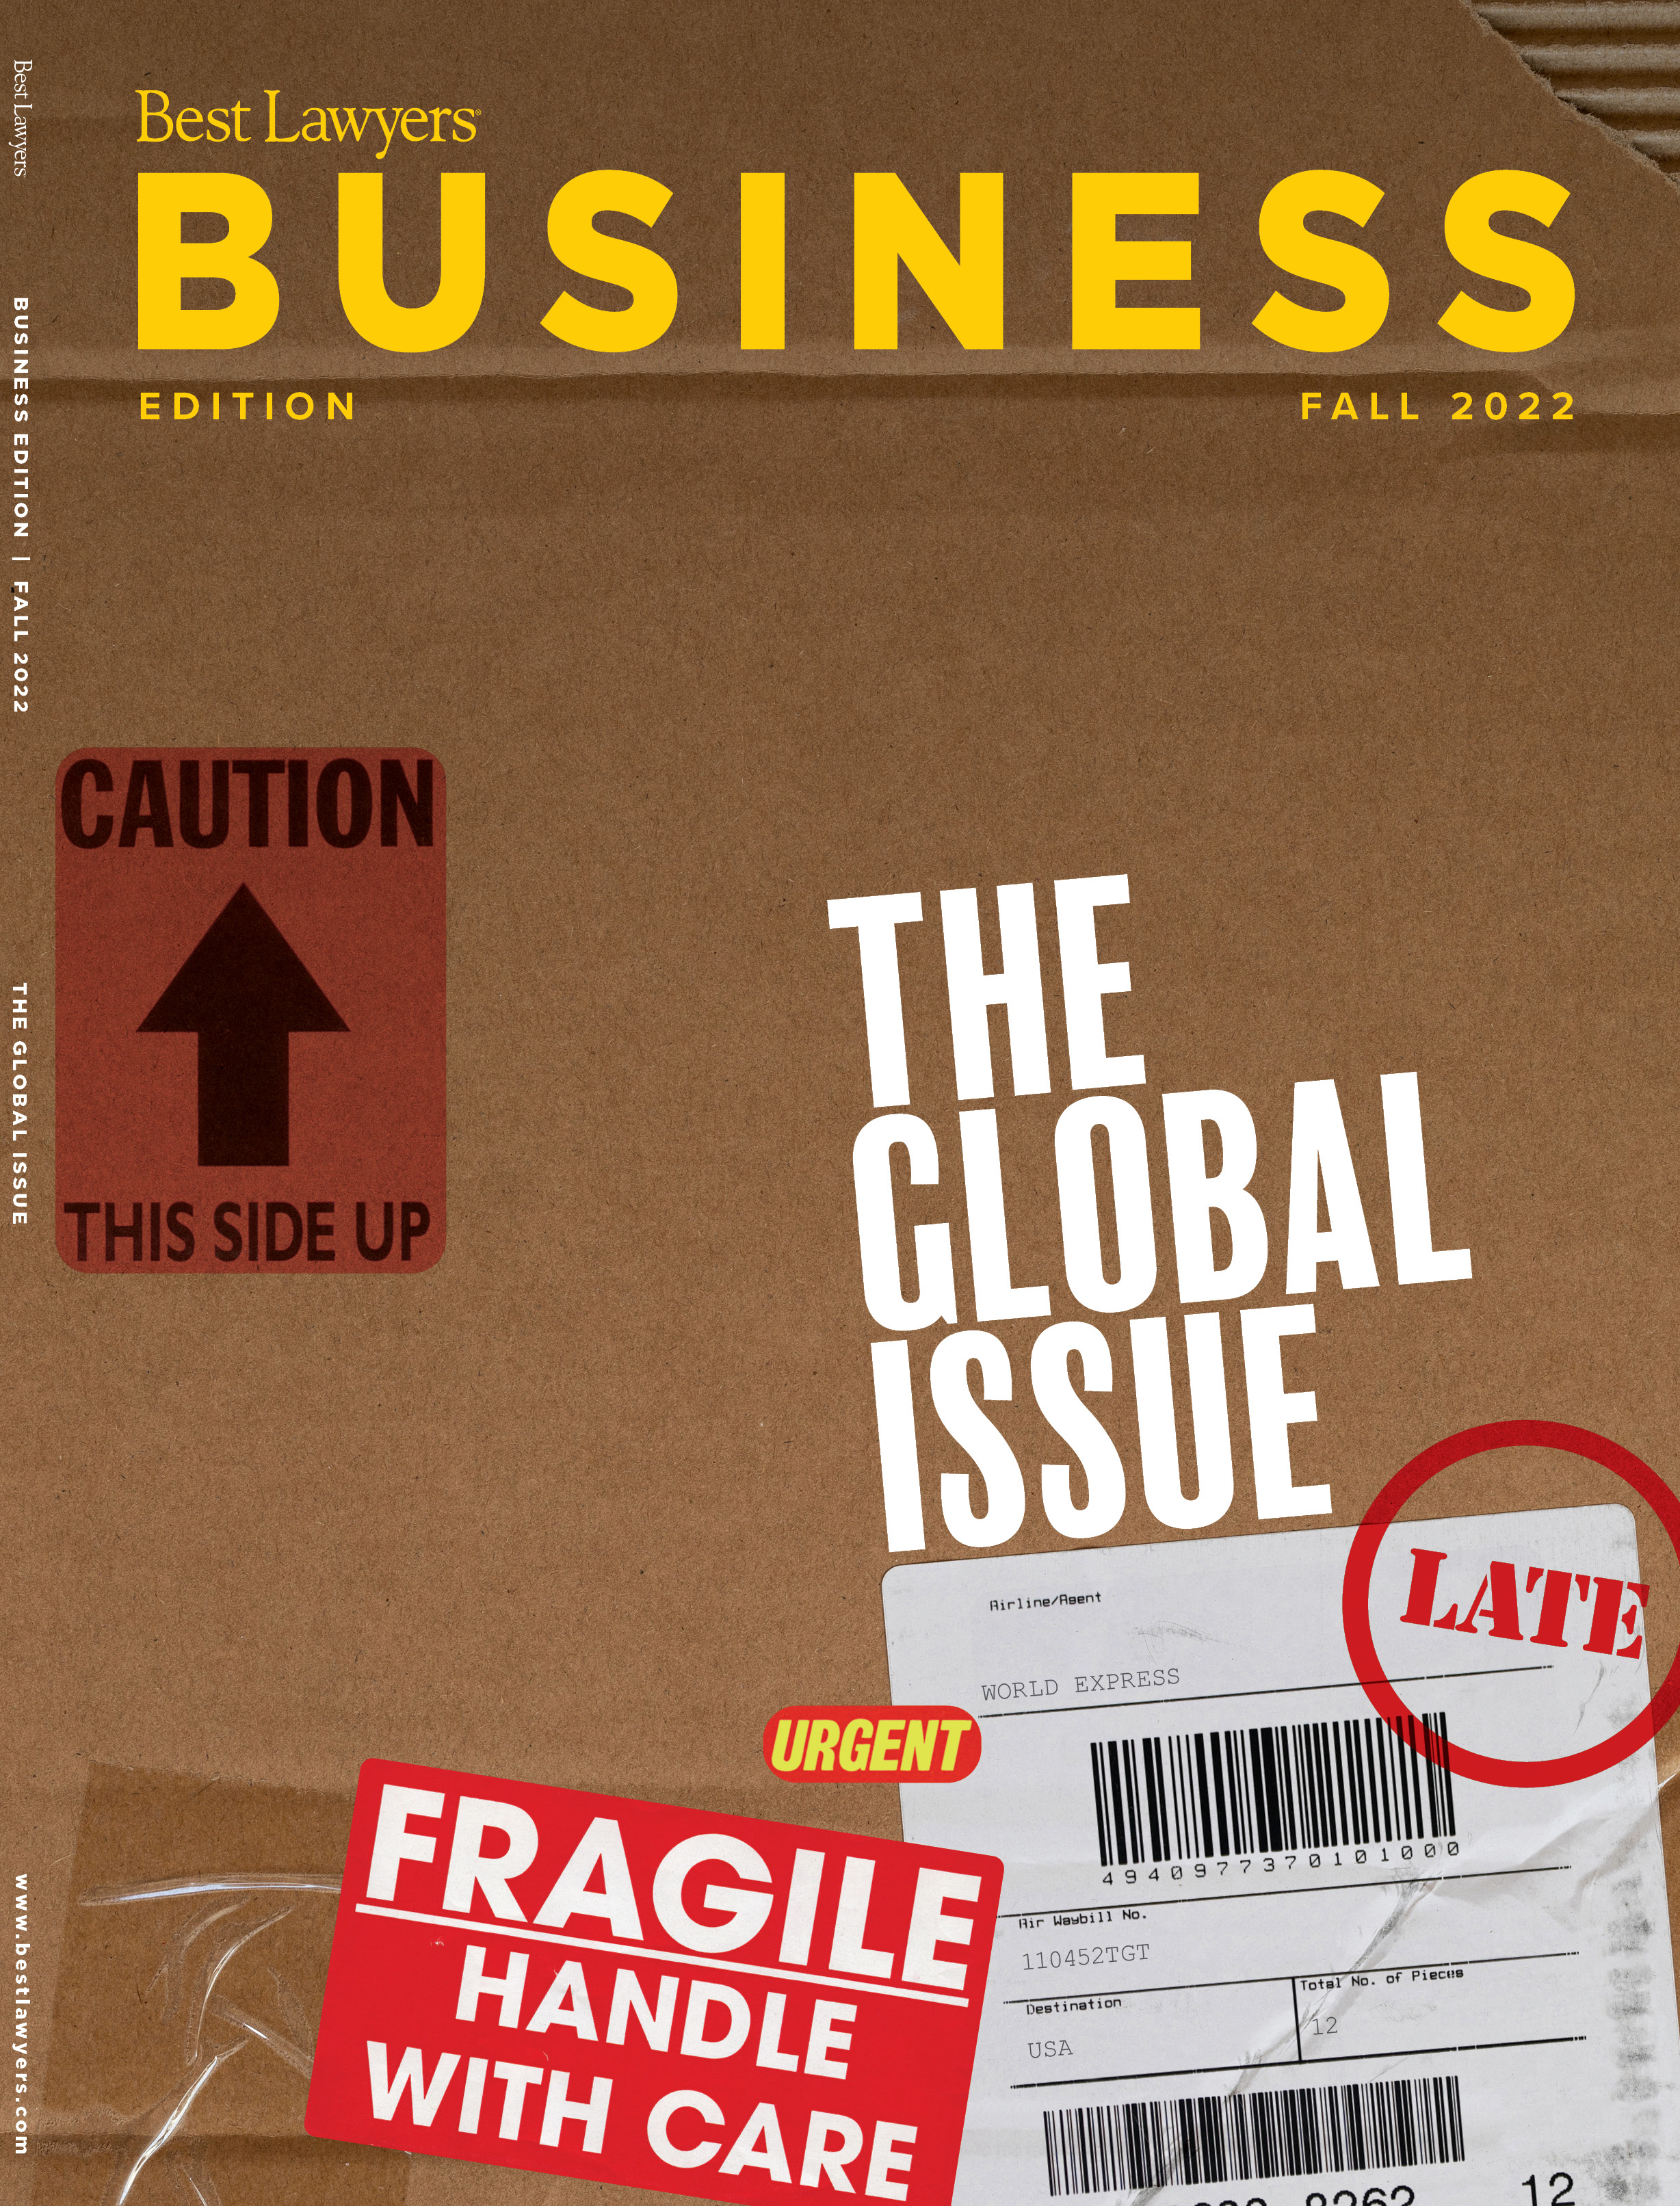 The Best Lawyers Business Edition: The Global Issue